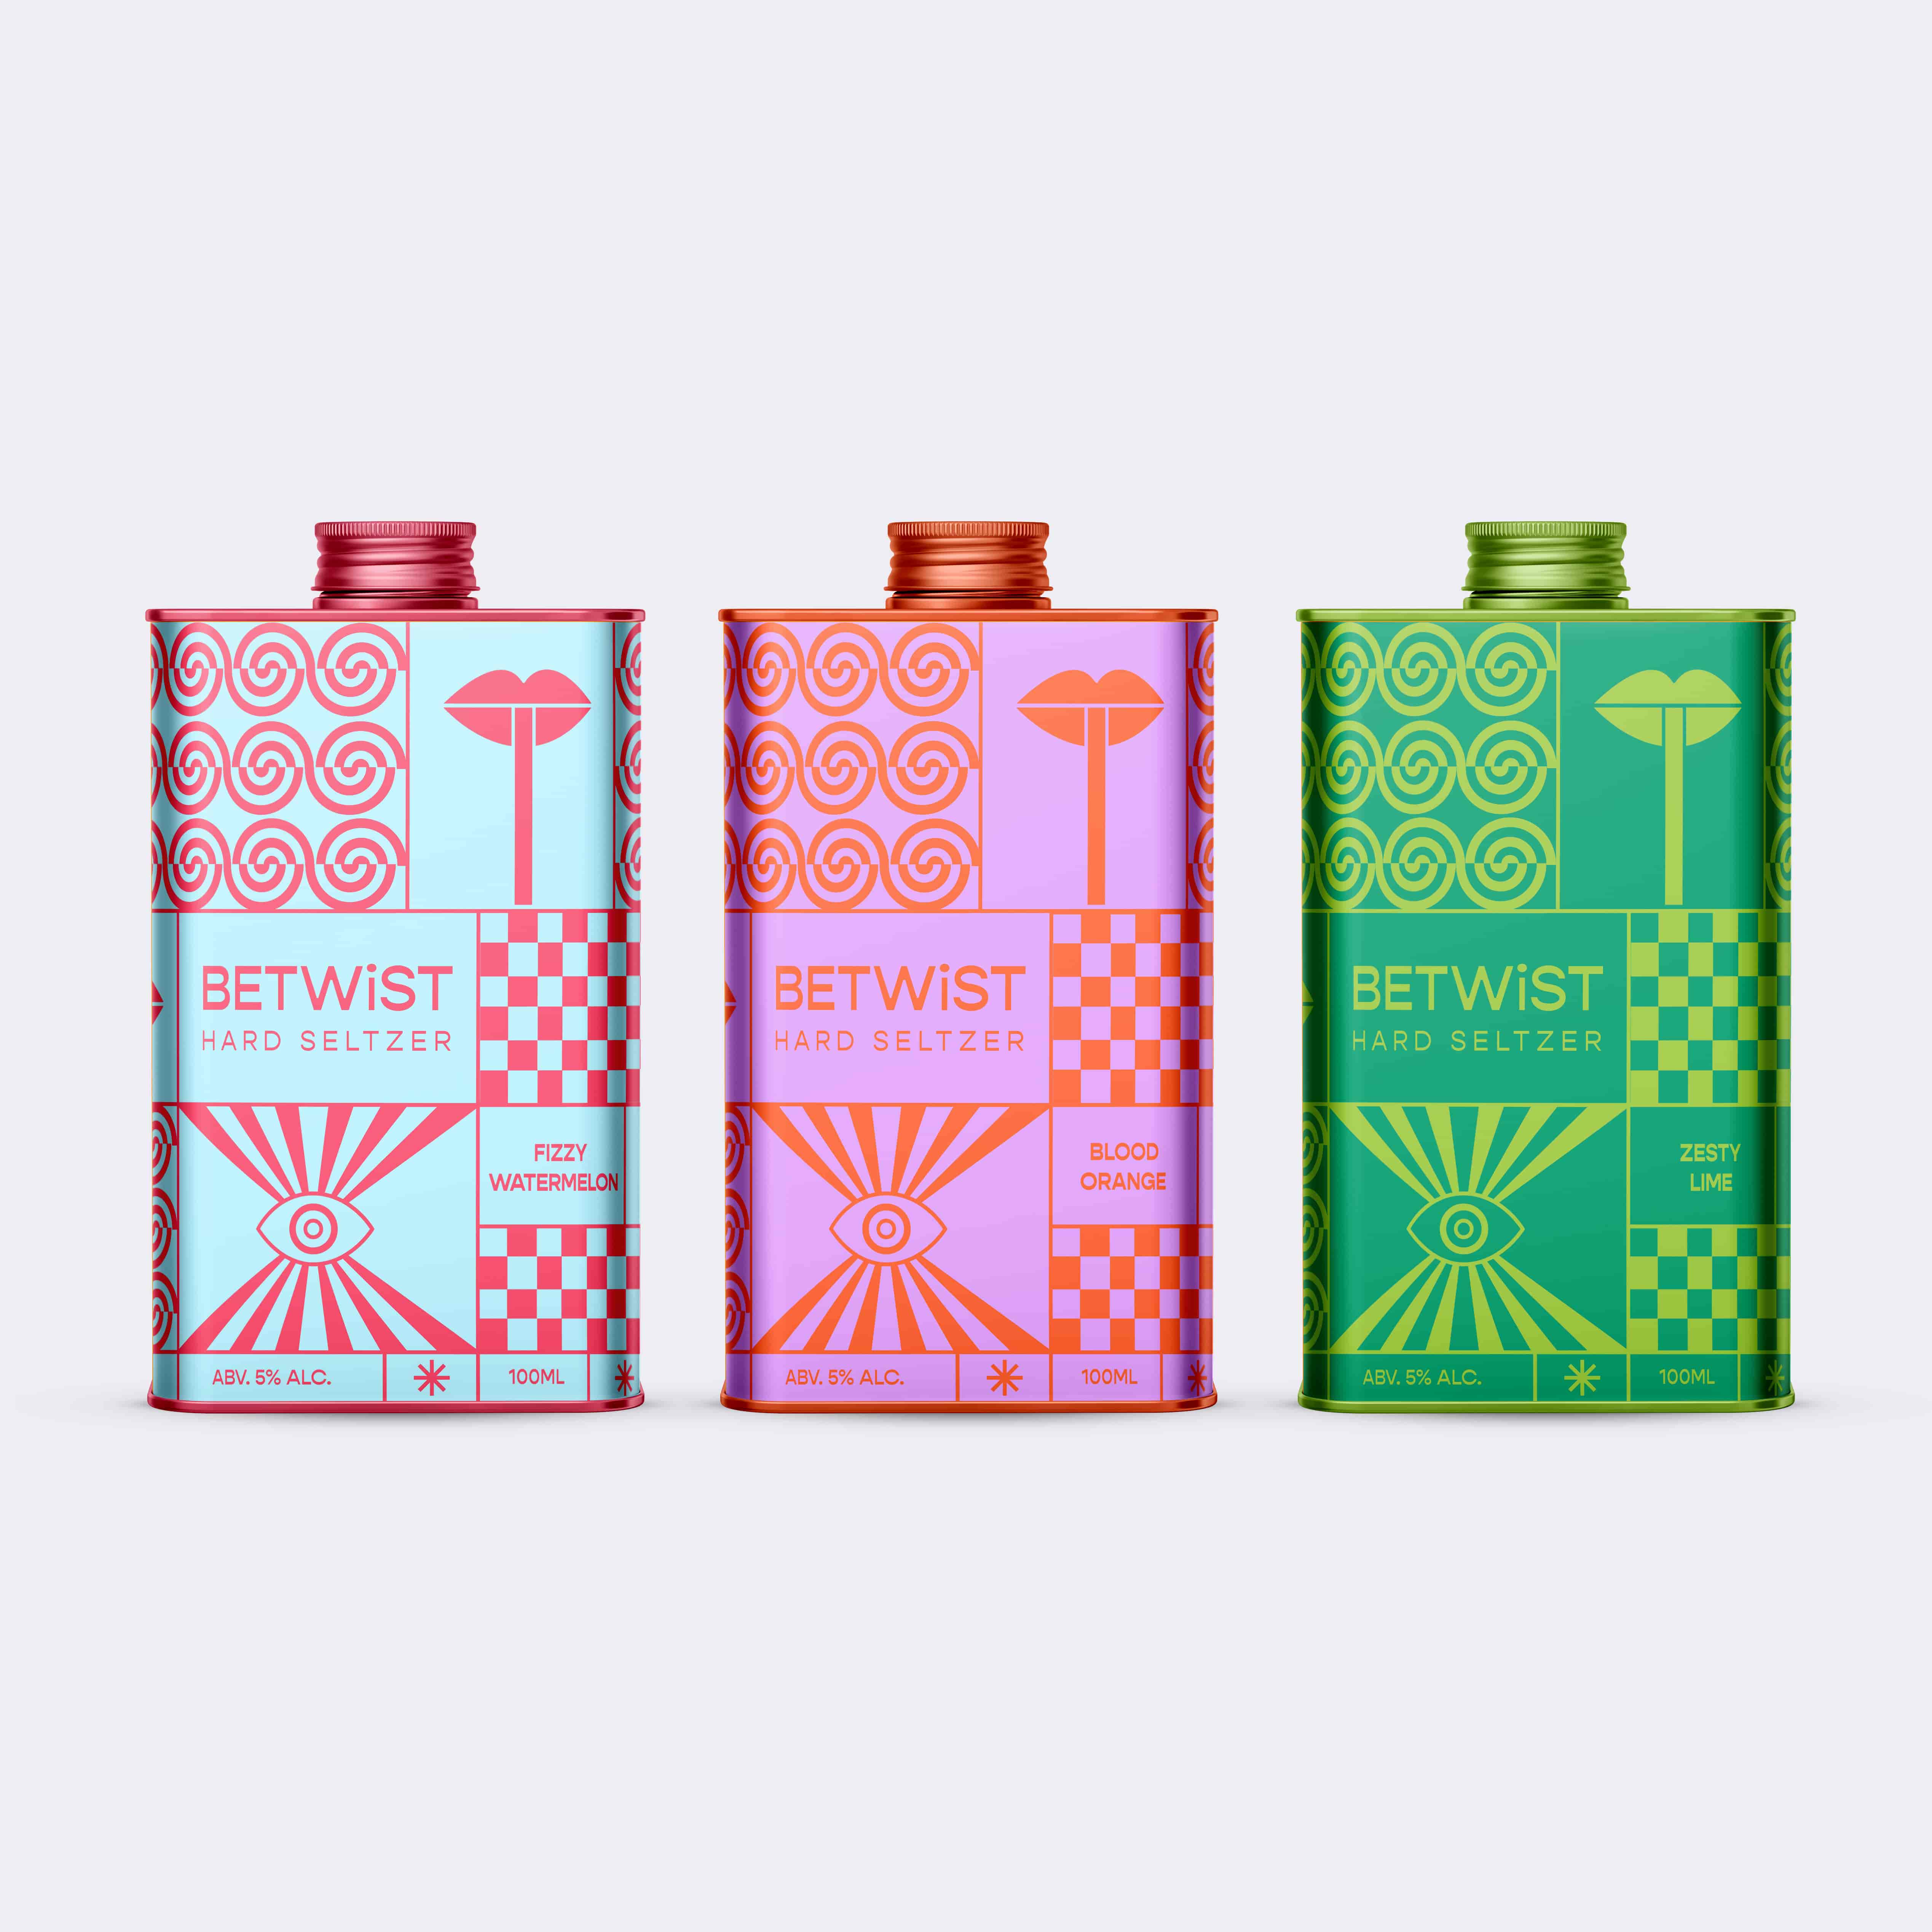 Maria Marks Design Concept for Betwist is a Ready-to-Drink Hard Seltzer